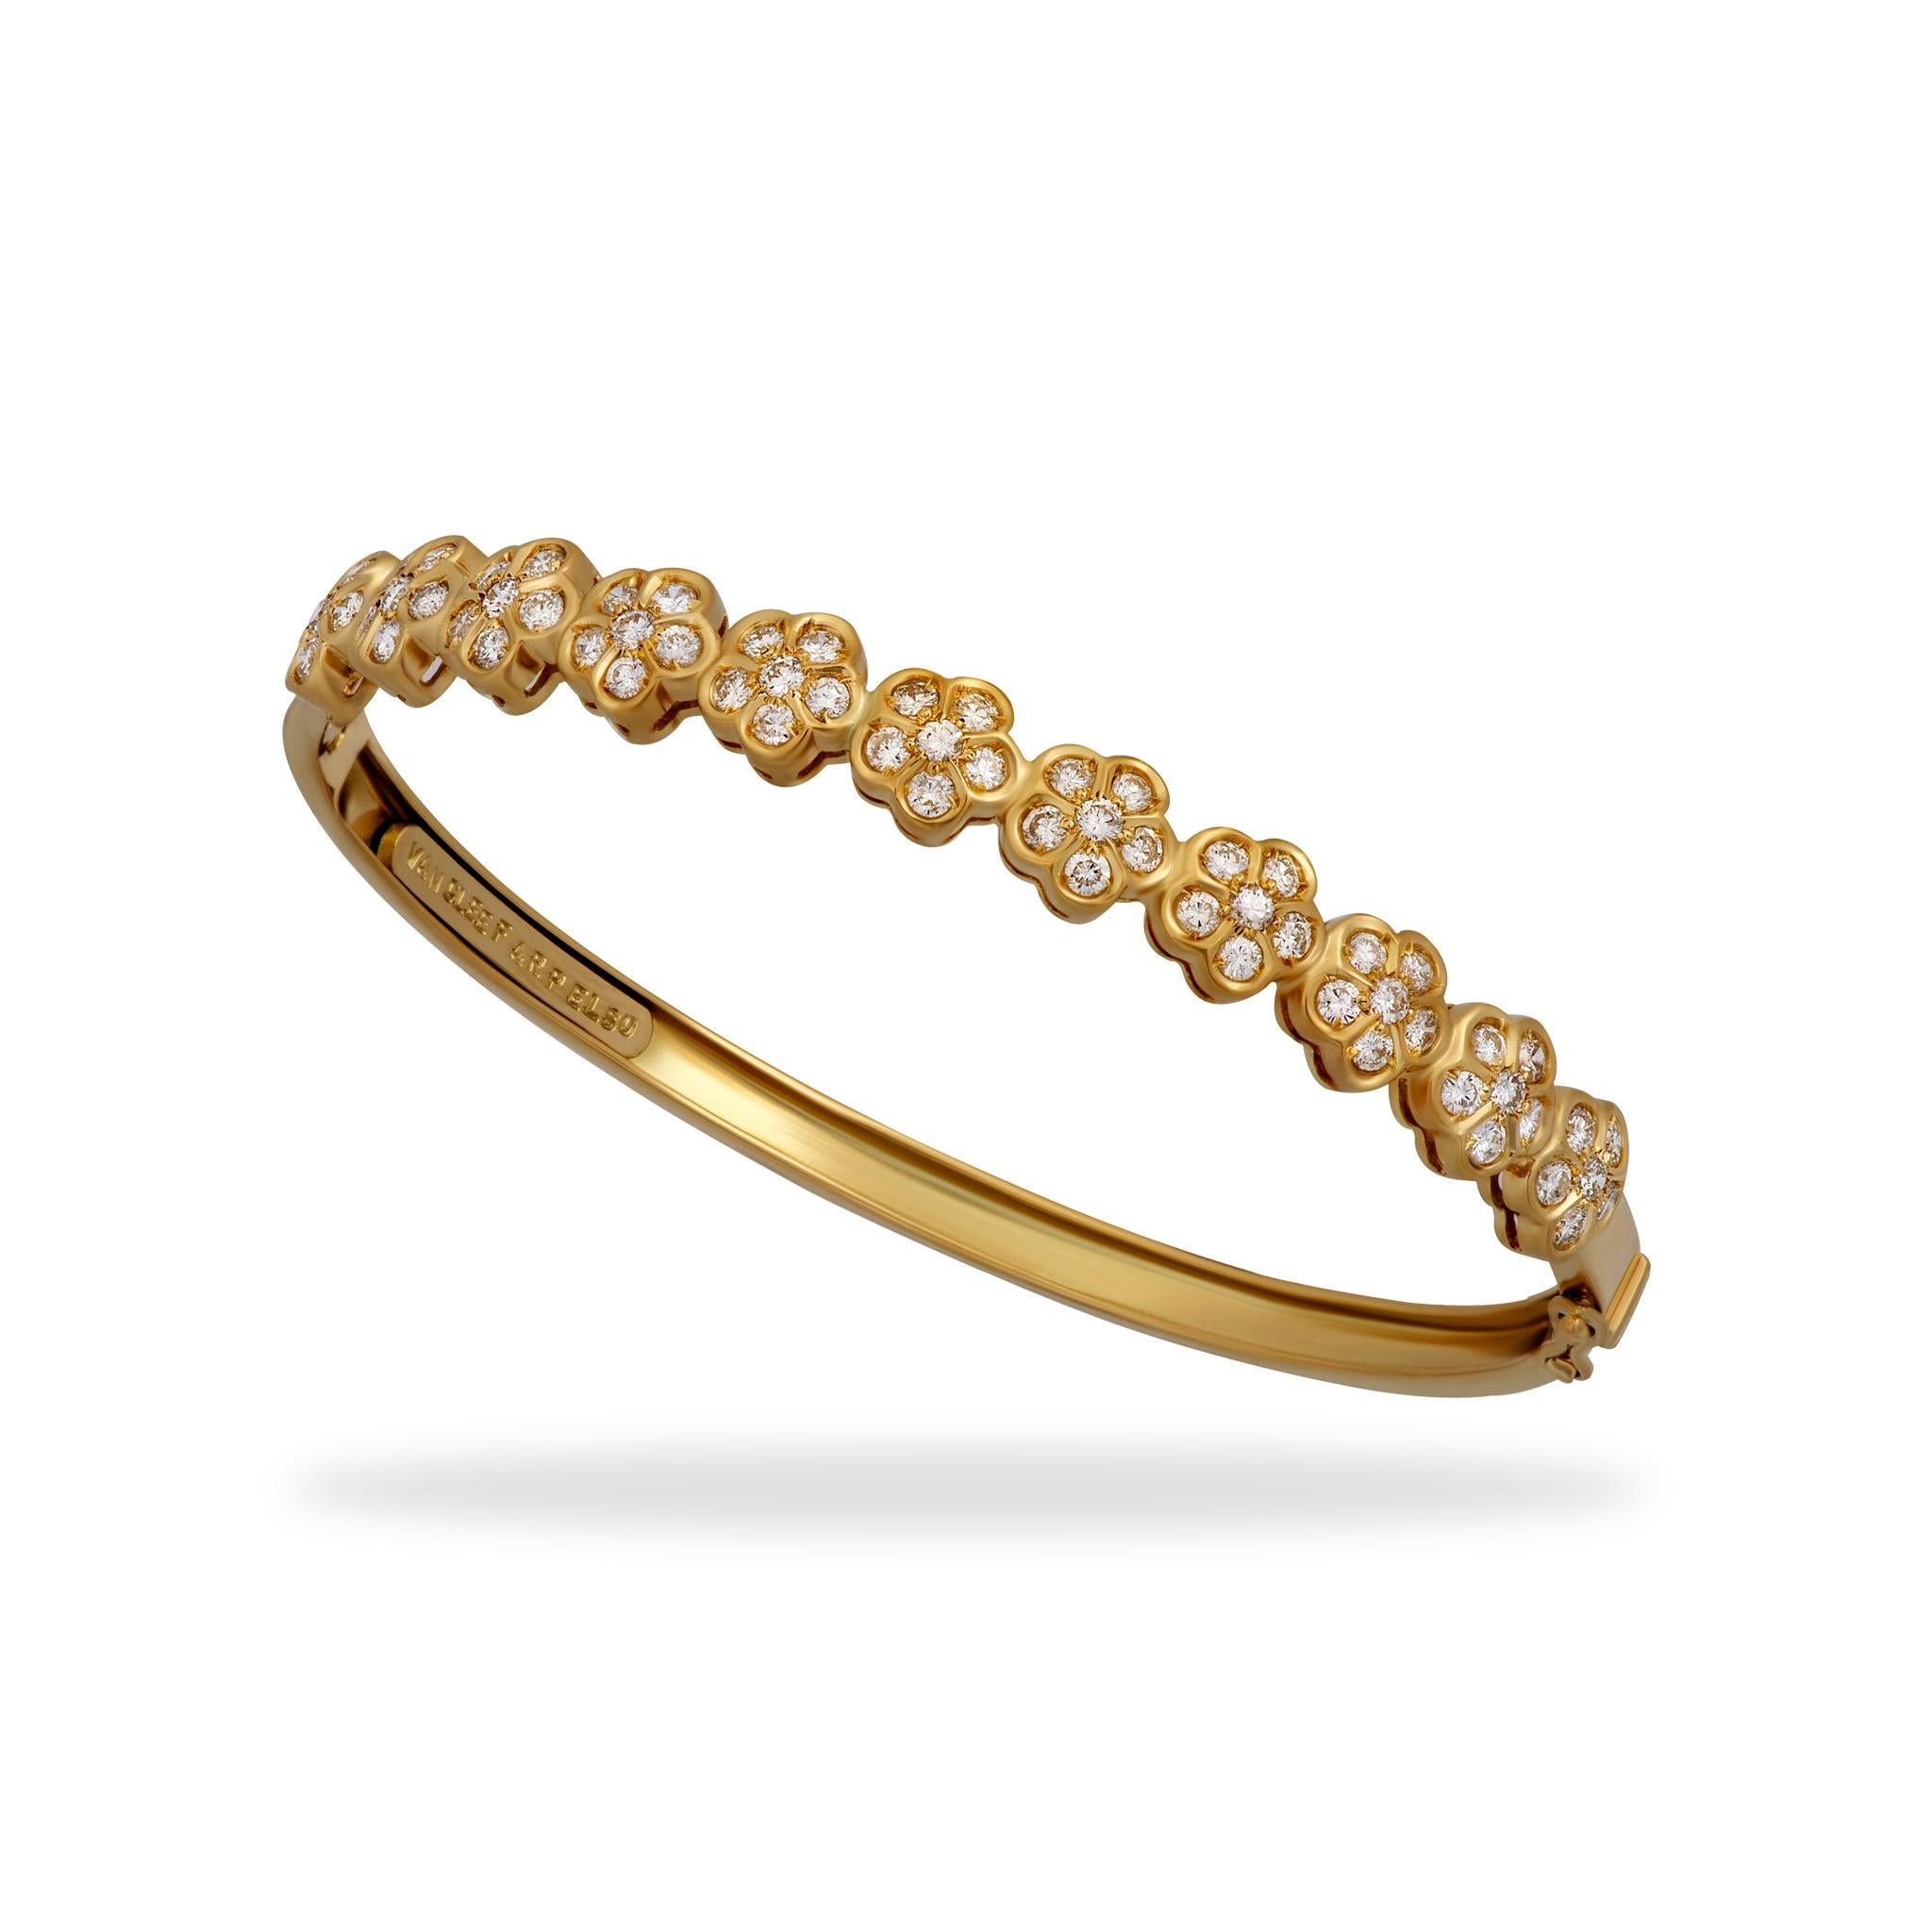 *** Comes with the original Van Cleef & Arpels papers ***
18K Yellow Gold
Diamond: 1.40ct twd
Total Weight: 17.3g
Bracelet Length: 6.5 inches
*** A matching necklace is also available, please check reference number: 18916-OOAX